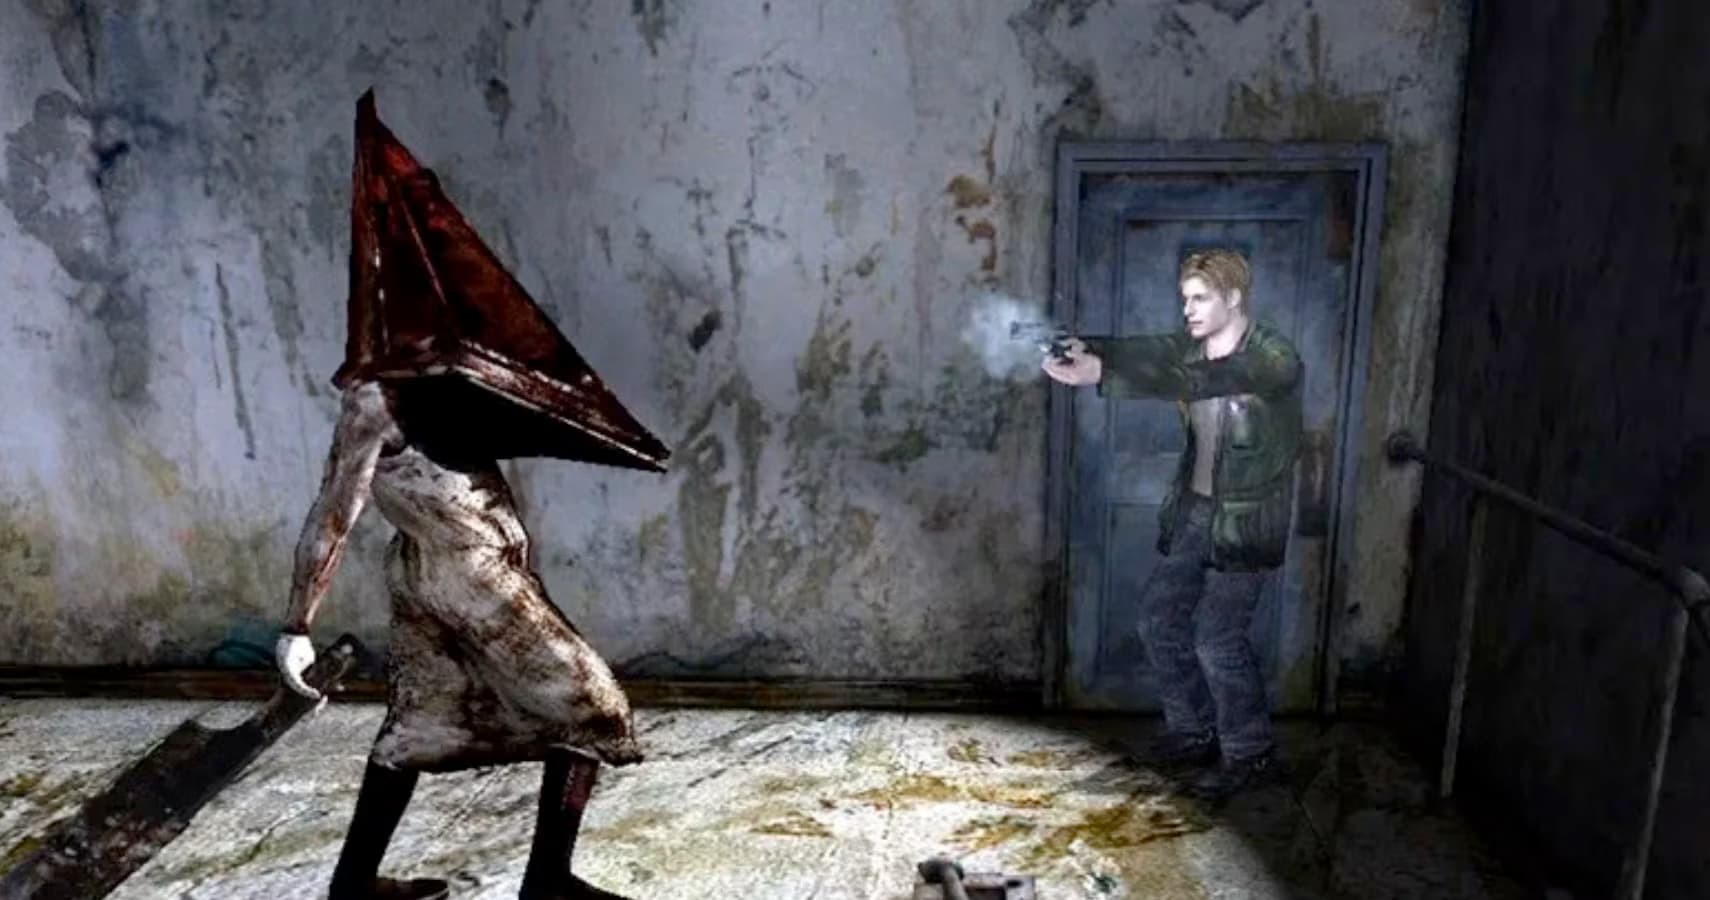 Silent Hill 2 Remake Has Been Announced And Is A Timed PS5/PC Exclusive